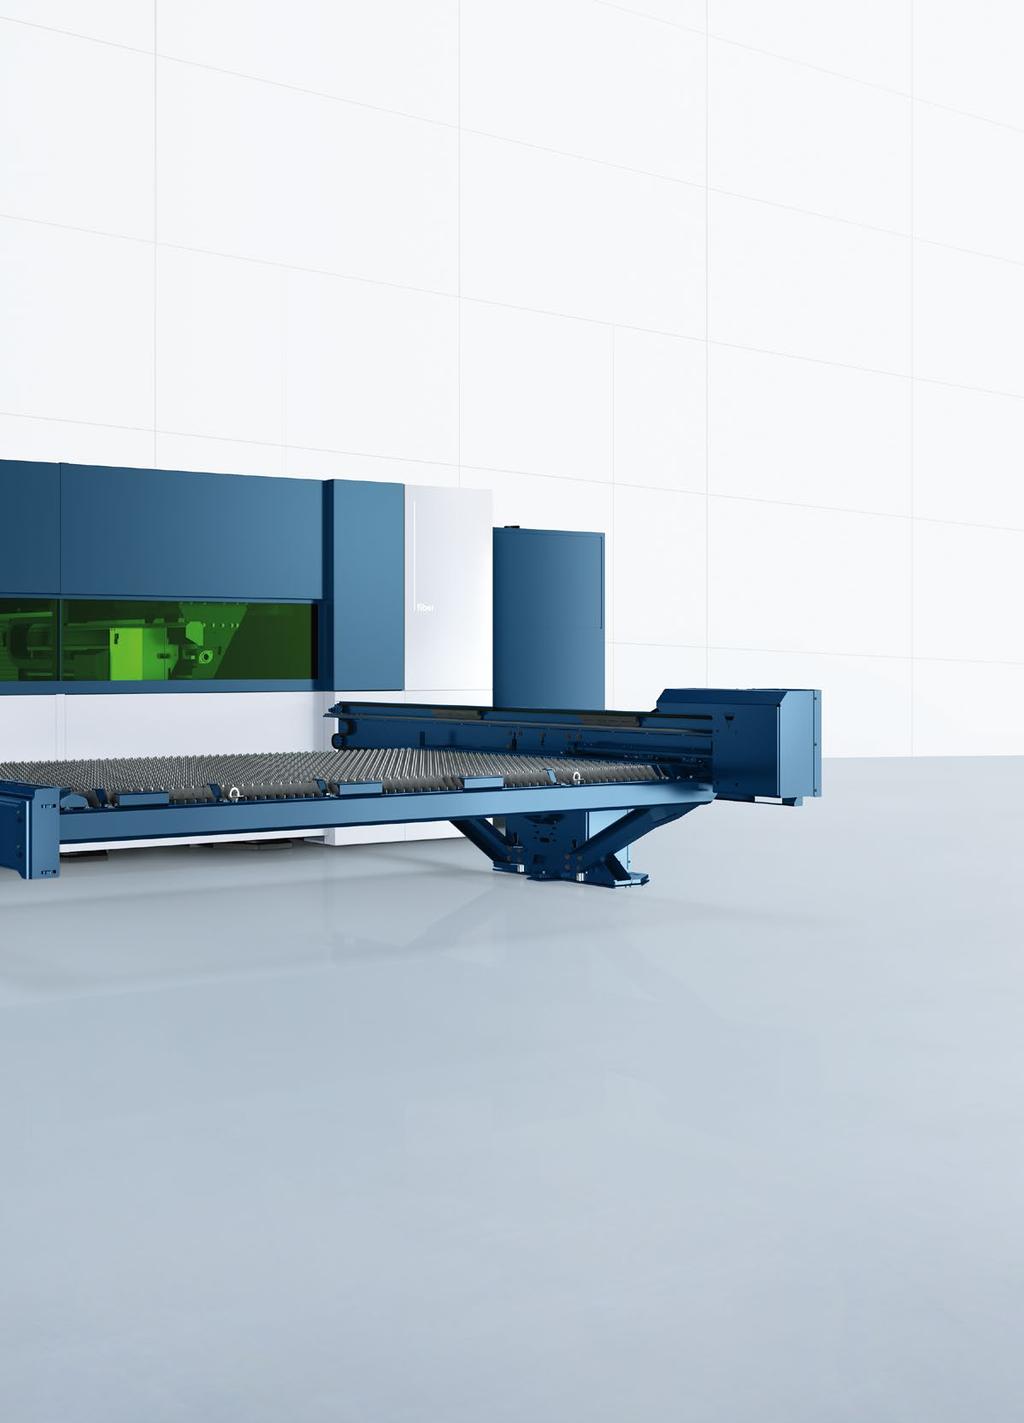 Series 2000 Products 13 The compact Series 2000 laser cutting machines combine minimum space requirements and ease of